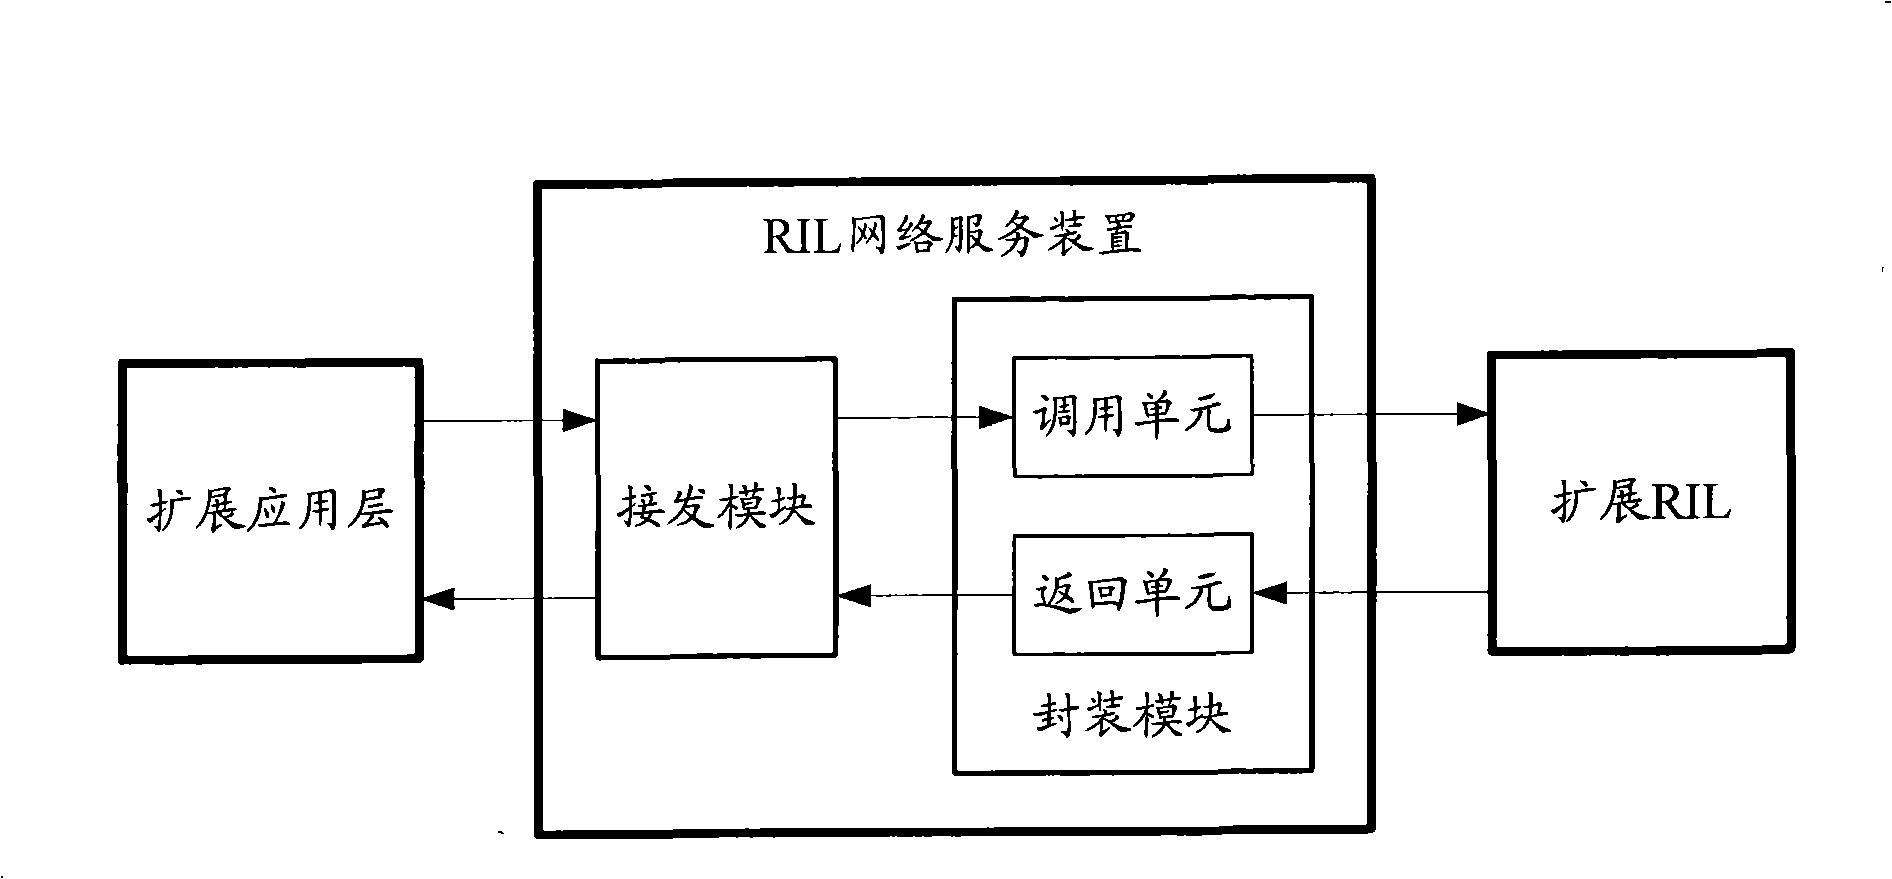 Method and apparatus for network service of wireless interface layer